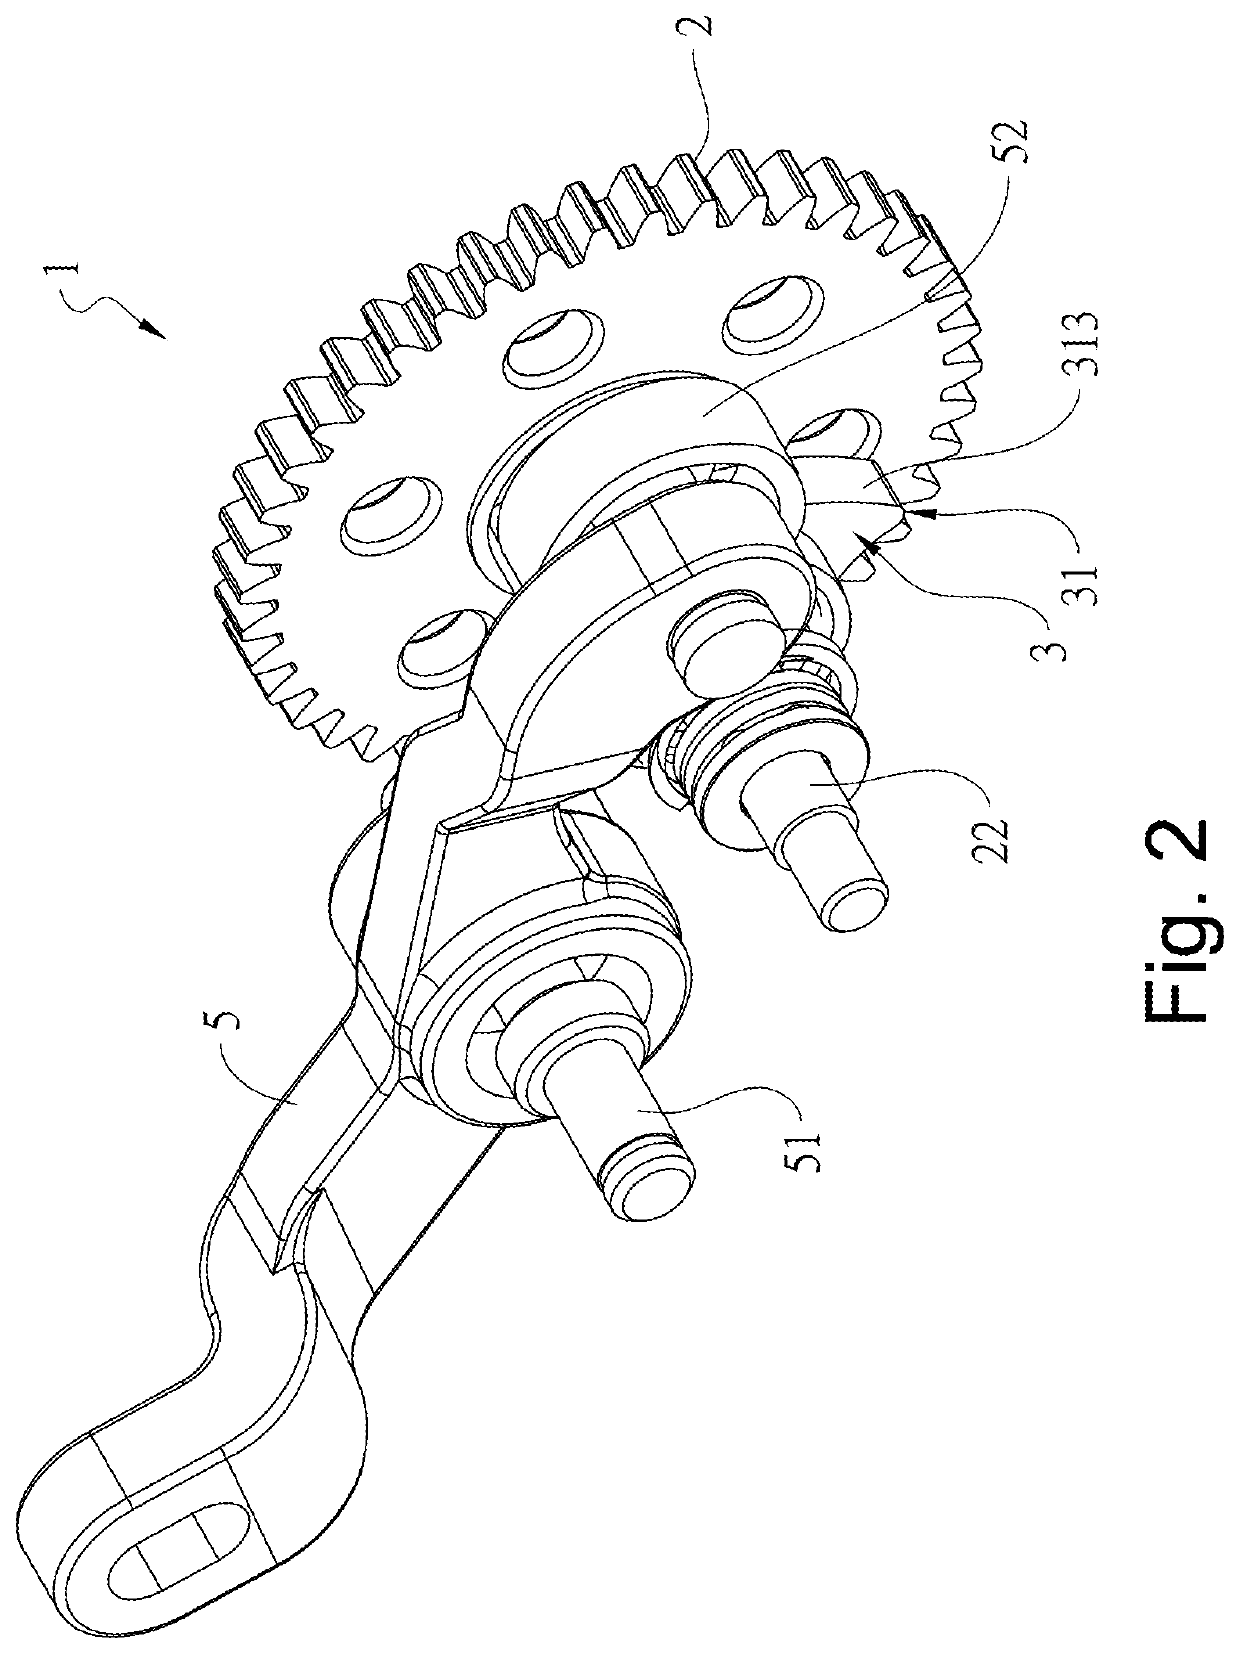 Structure for preventing formation of dead point for cam wheel and strapping device using the same